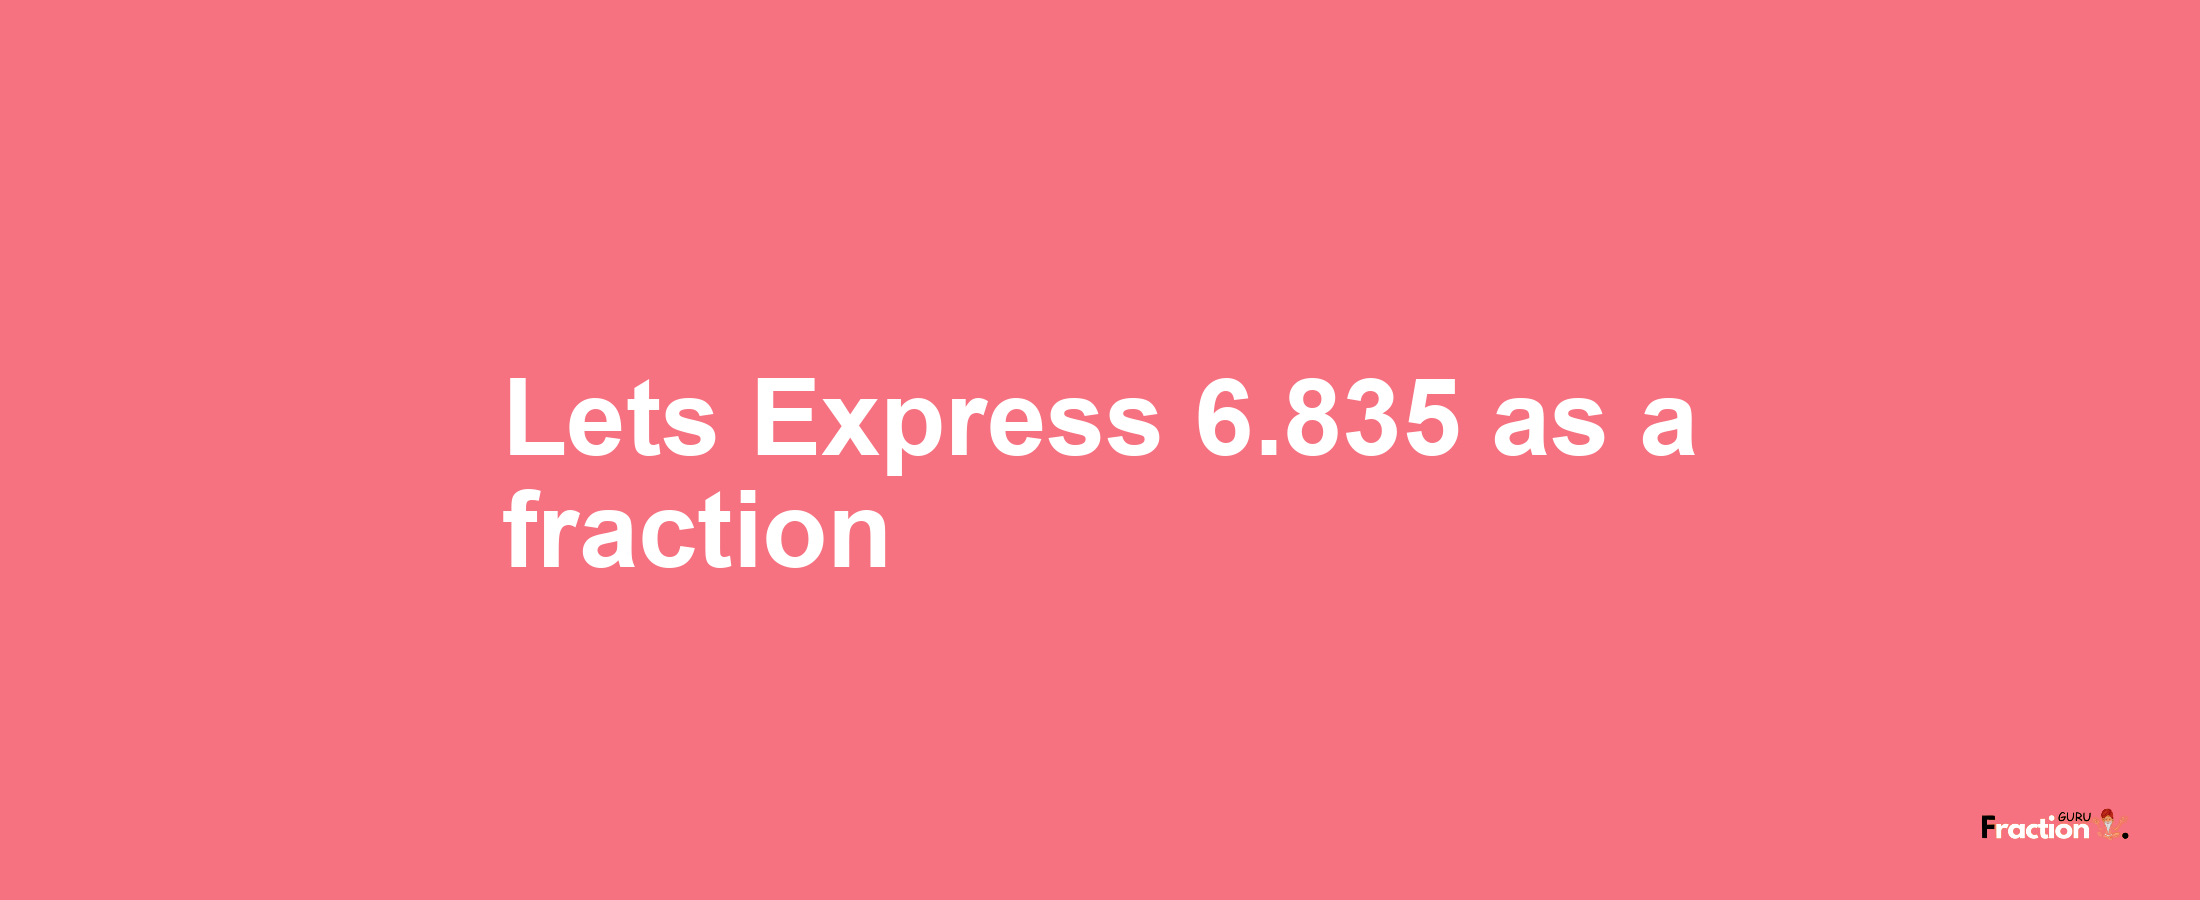 Lets Express 6.835 as afraction